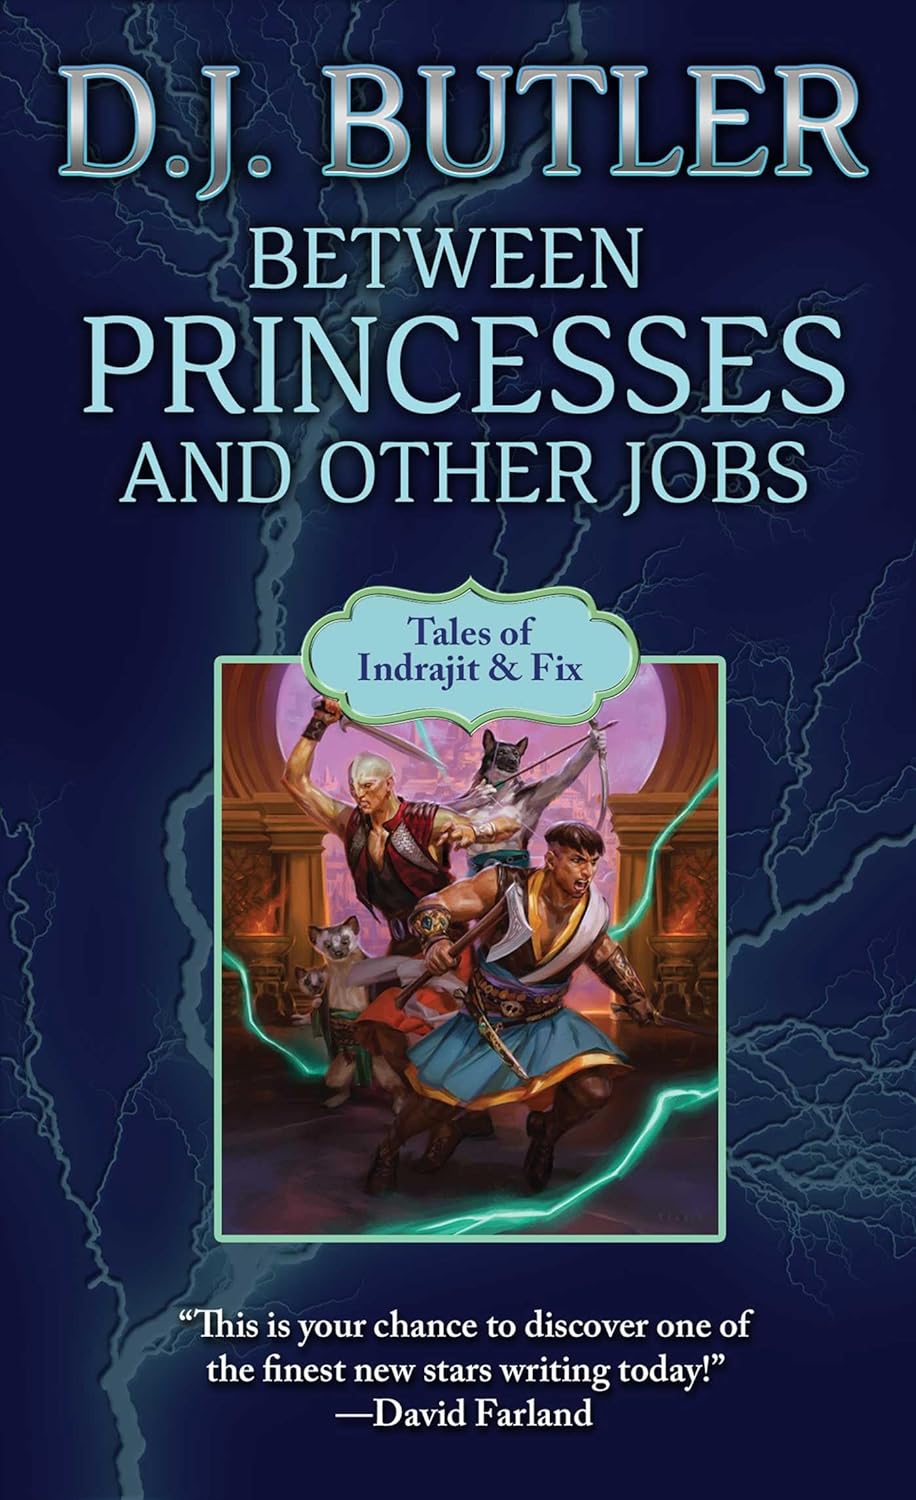 princesses and other jobs